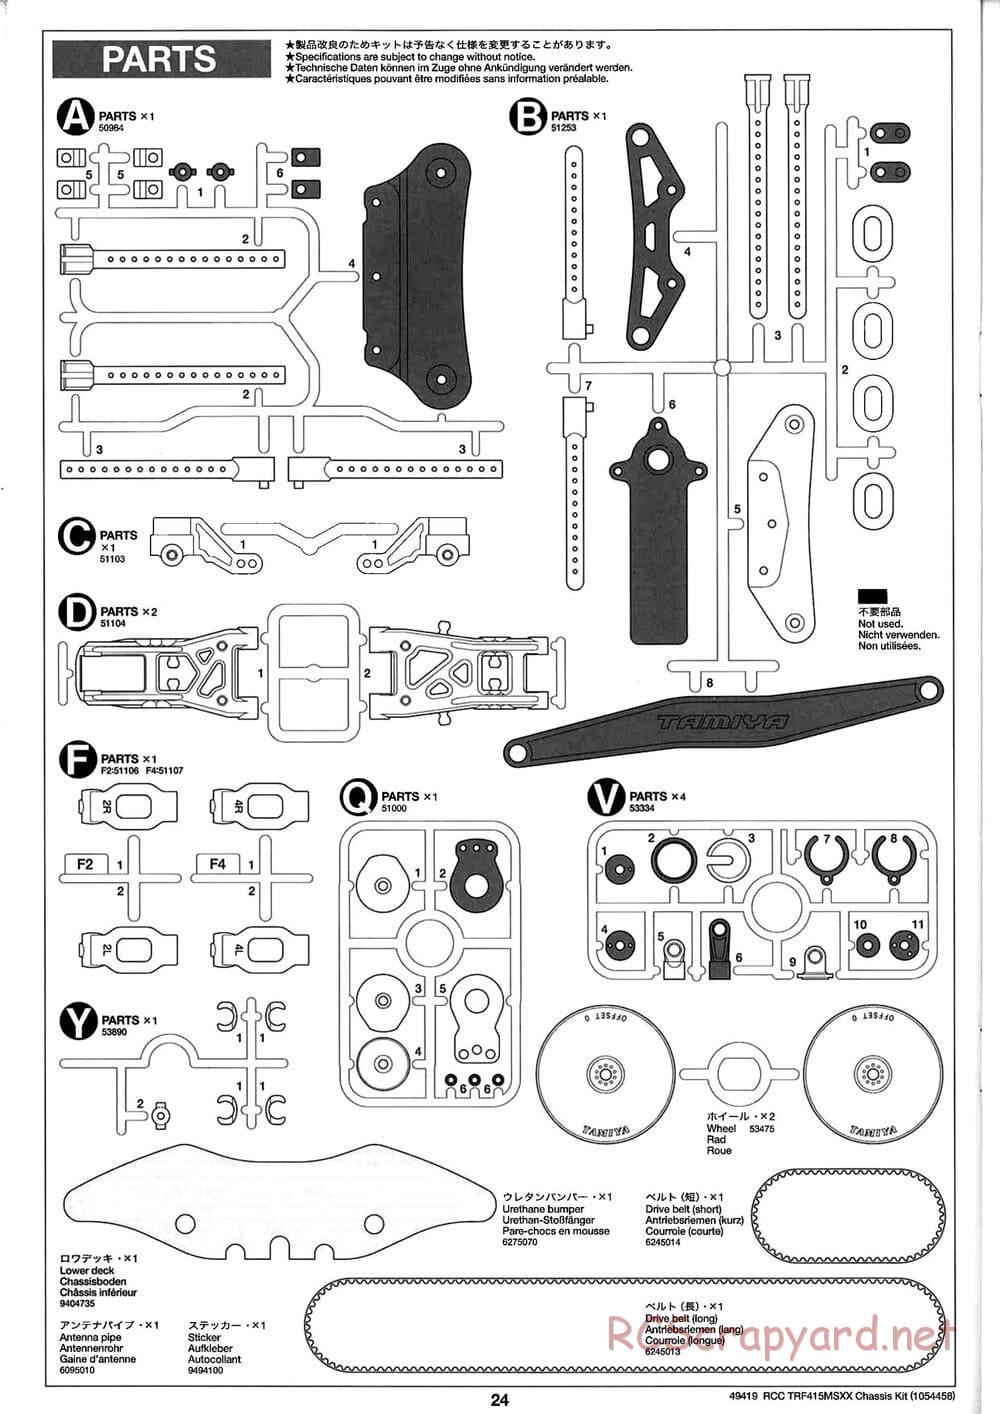 Tamiya - TRF415-MSXX Chassis - Manual - Page 24